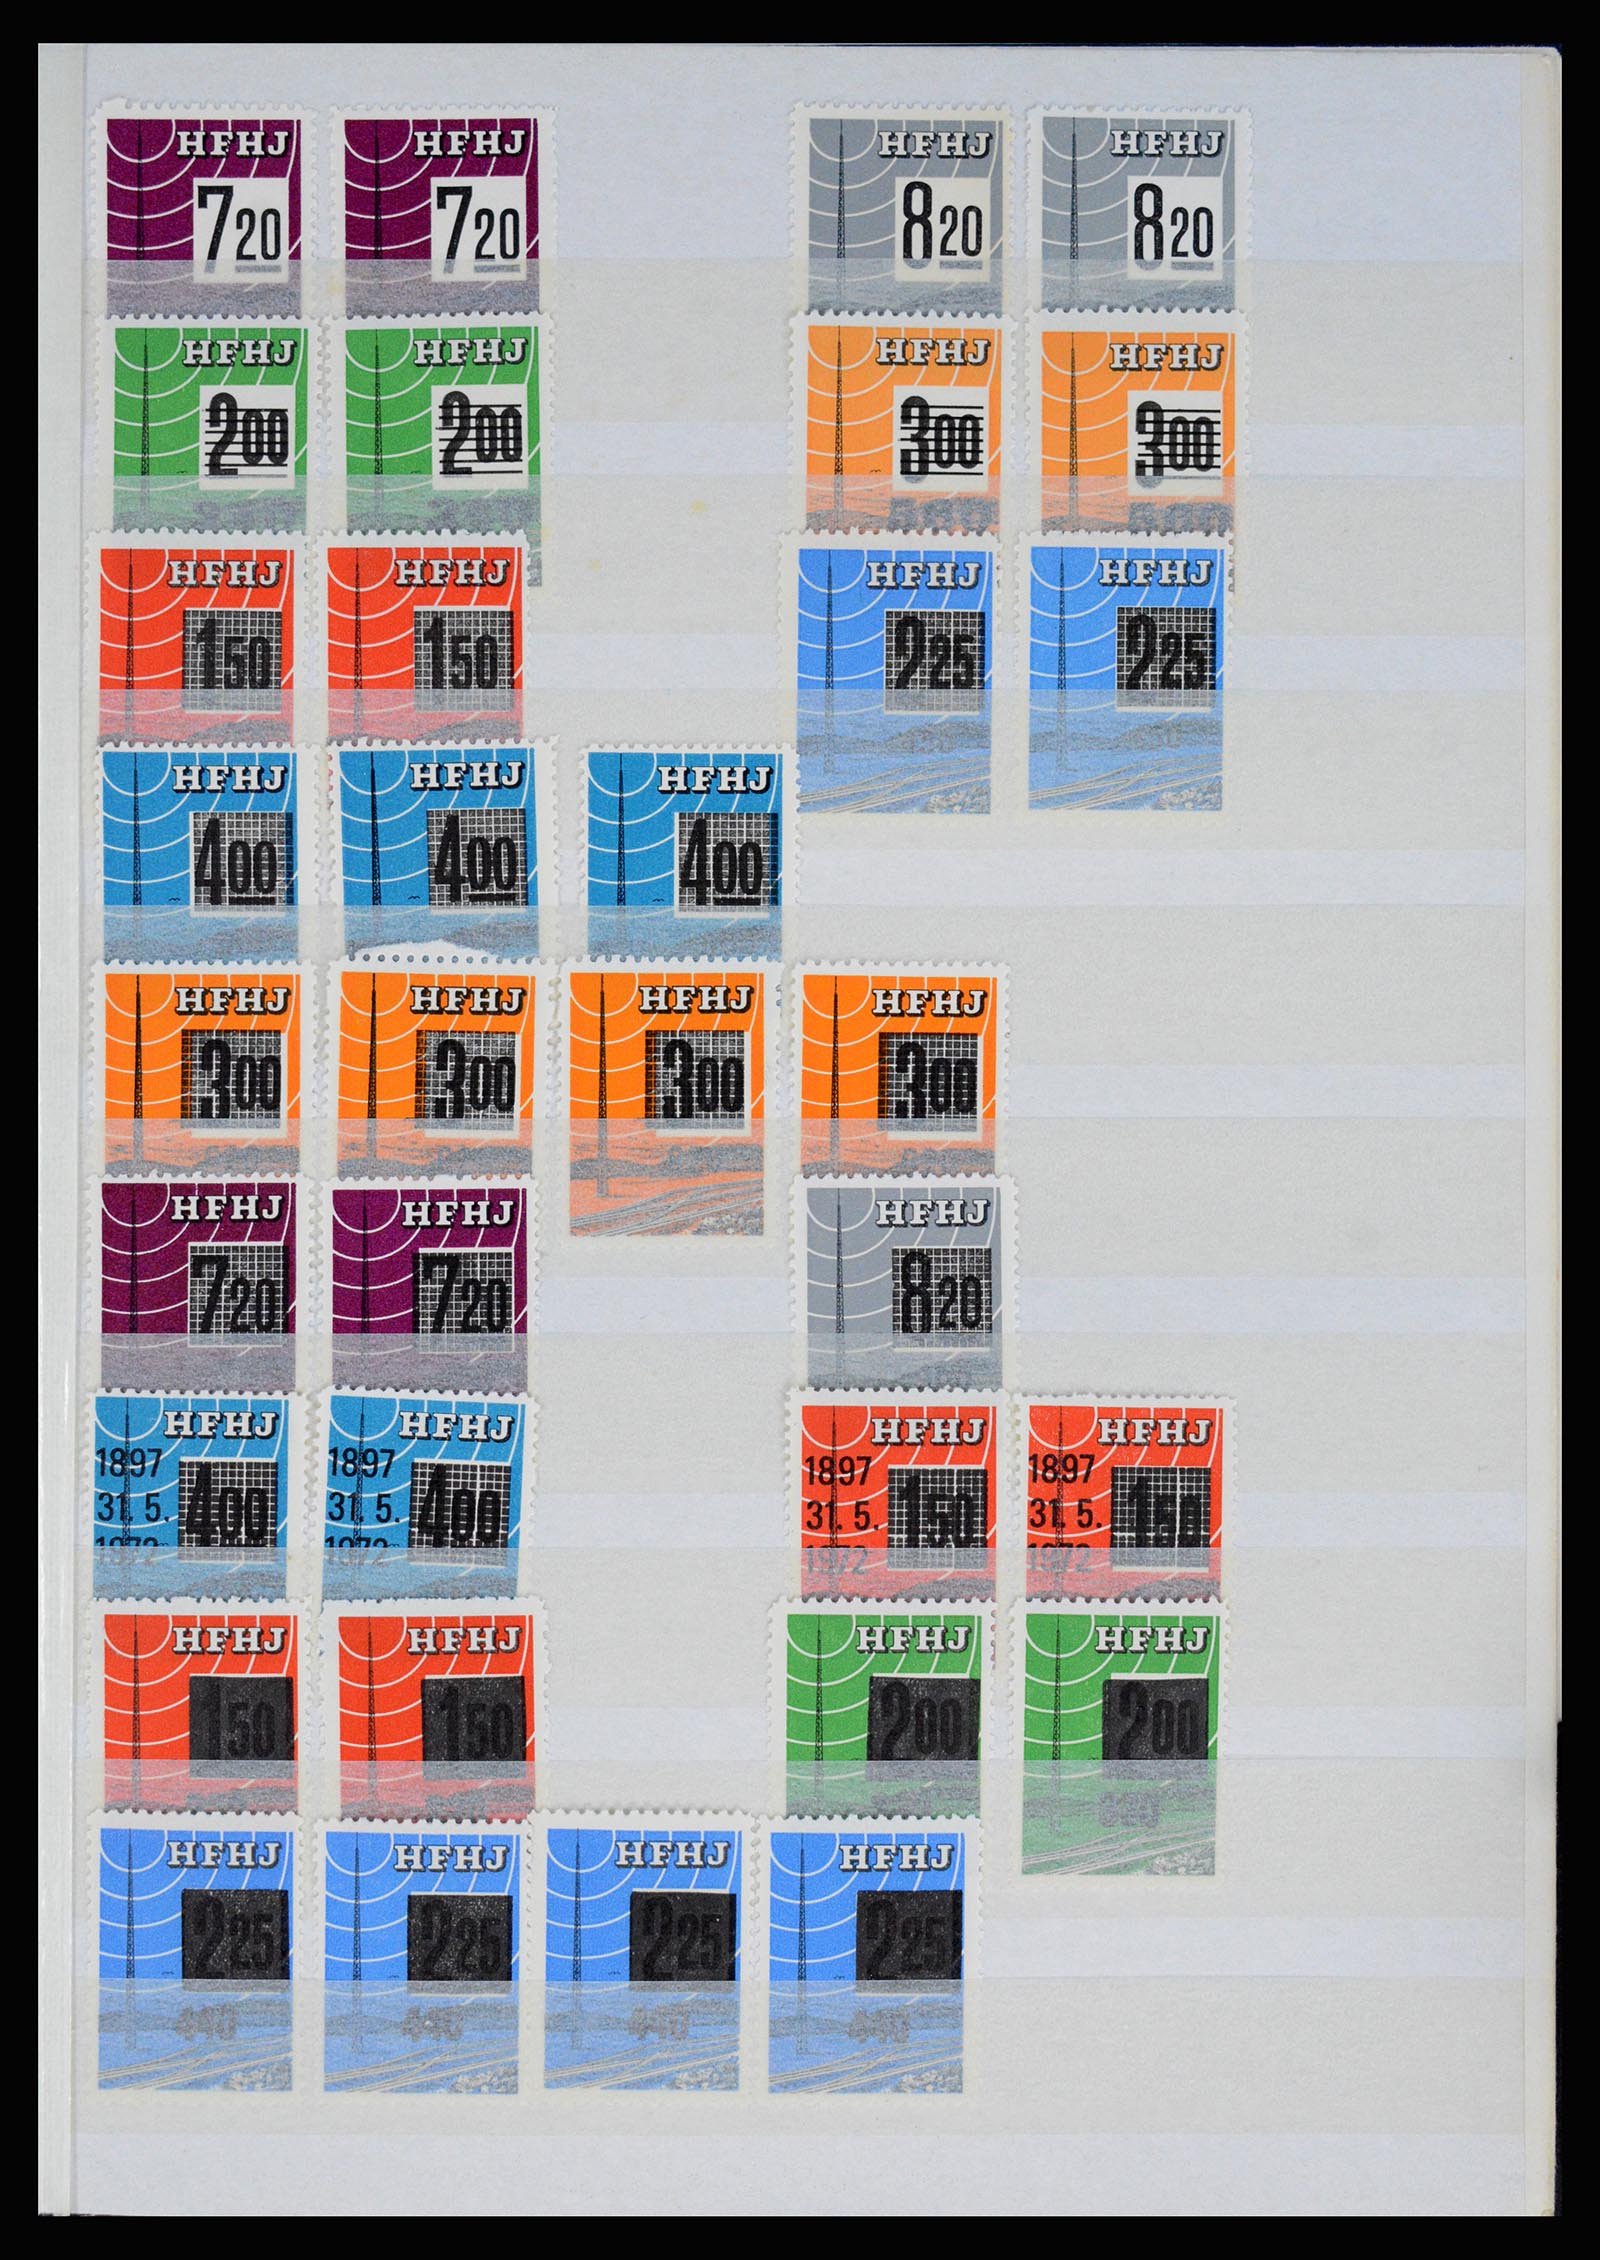 36982 025 - Stamp collection 36982 Denmark railroad stamps.